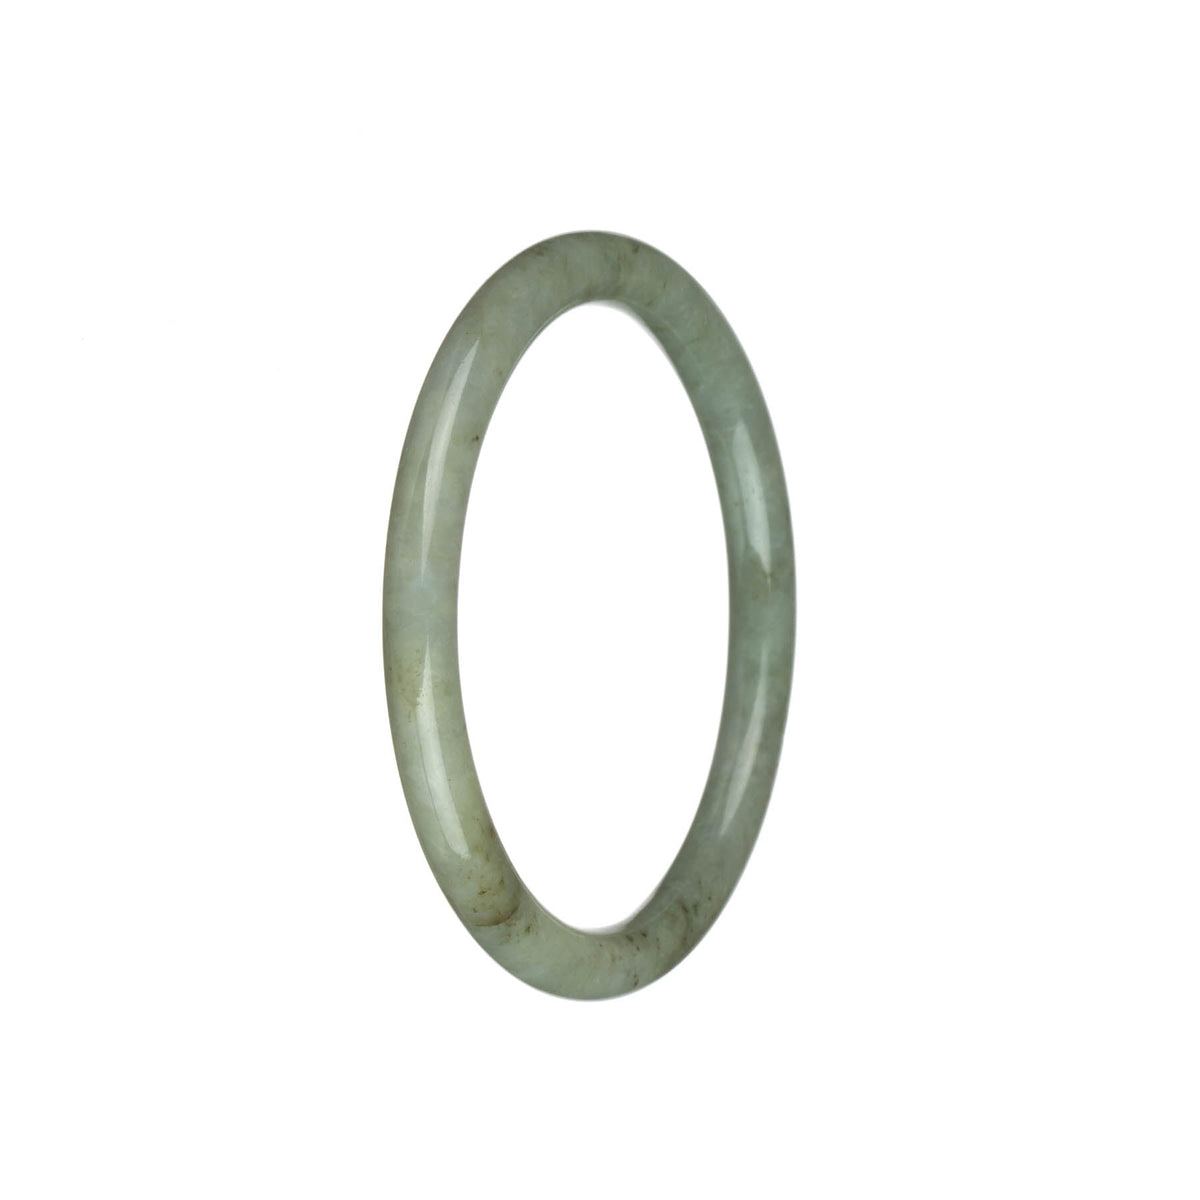 A petite round bracelet made of high-quality Burmese Jade in a beautiful pale olive green color. Perfect for adding a touch of elegance to any outfit.